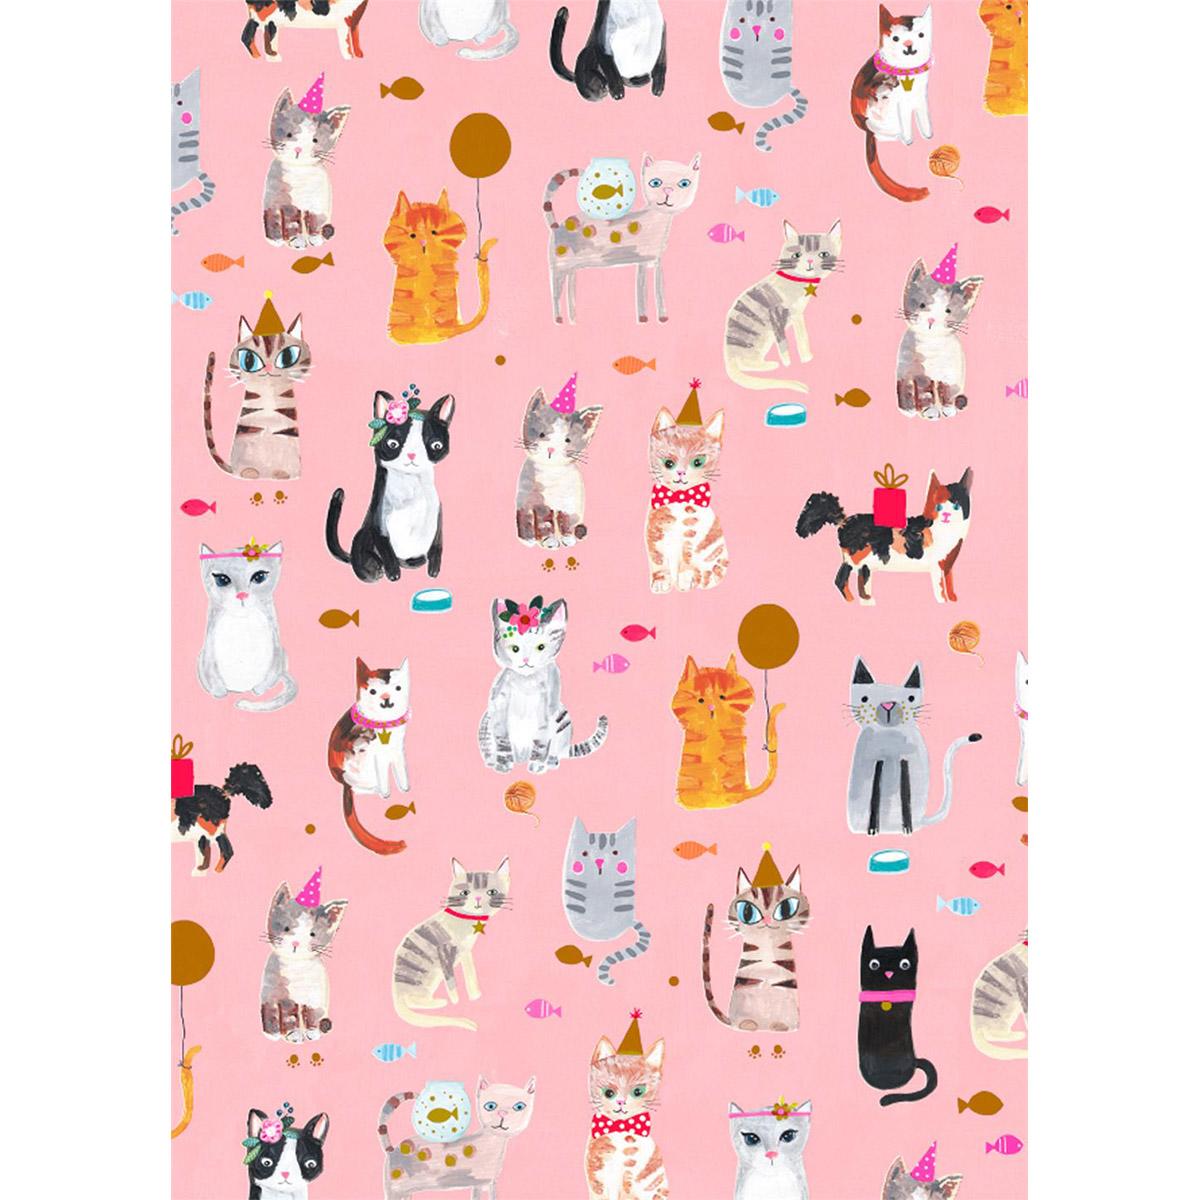 Luxury Gift Wrap Featuring Cats From The Cats & Whiskers Range By Glick Image